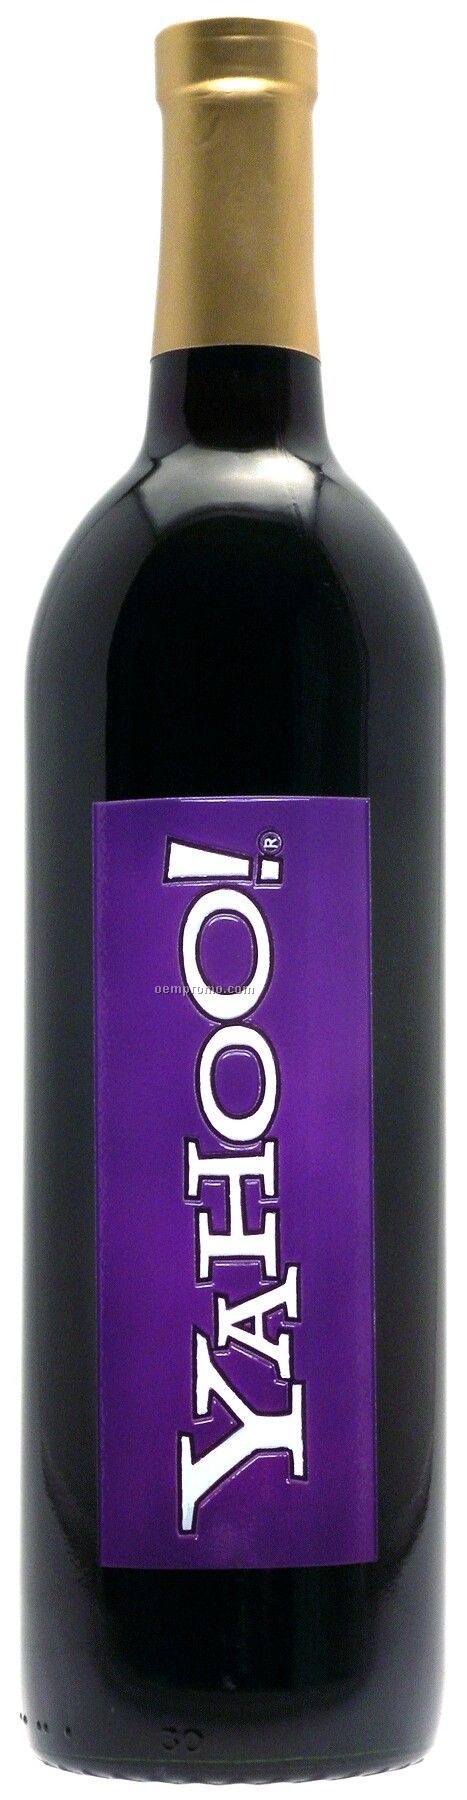 750ml Standard Cabernet Sauvignon Wine Etched With 2 Color Fills